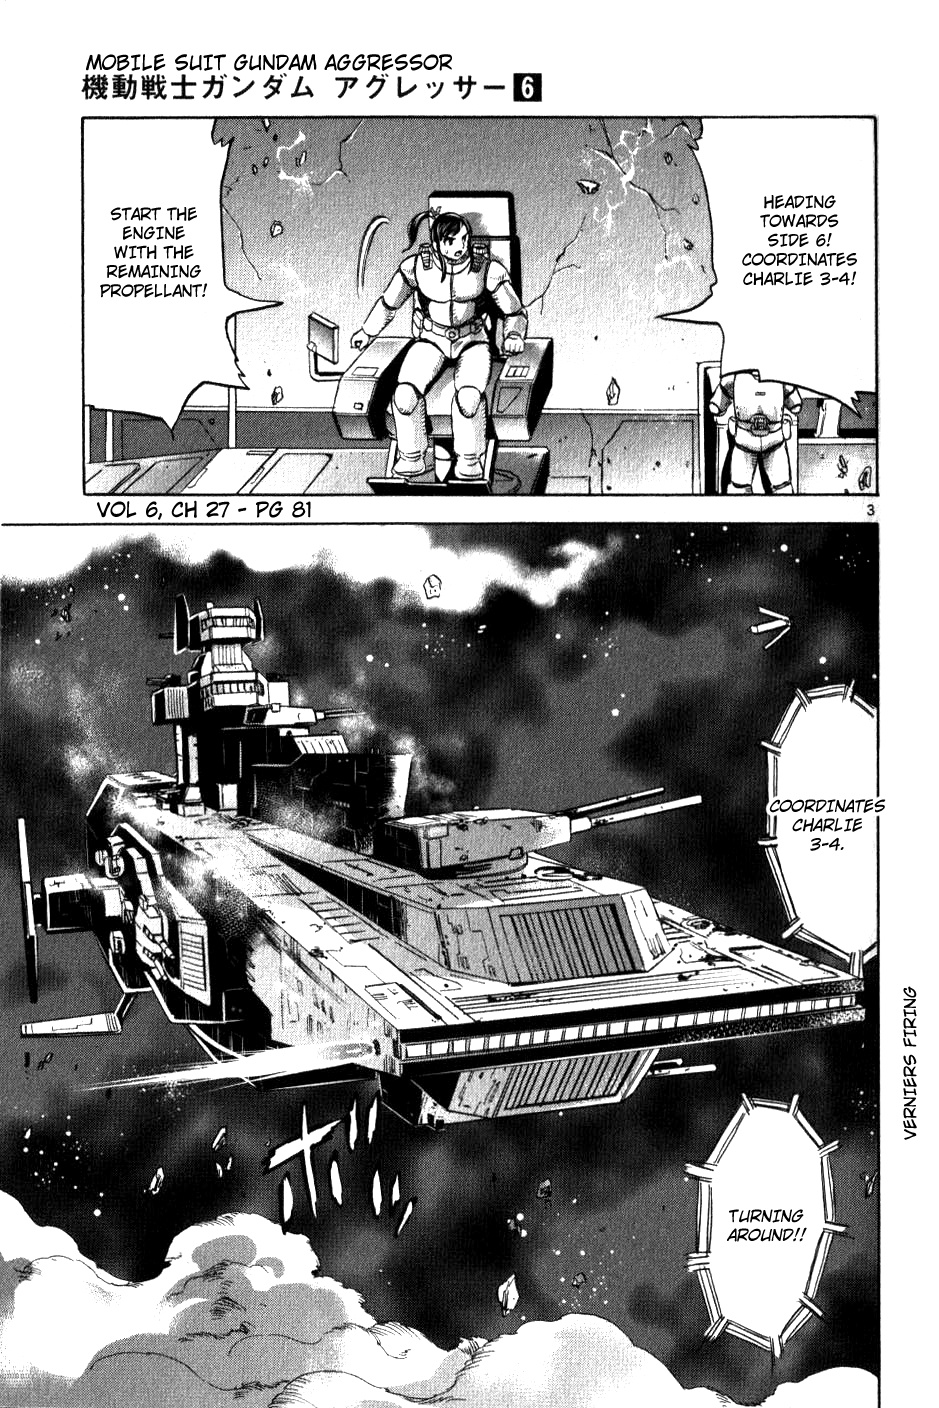 Mobile Suit Gundam Aggressor Vol.6 Chapter 27 - Picture 3